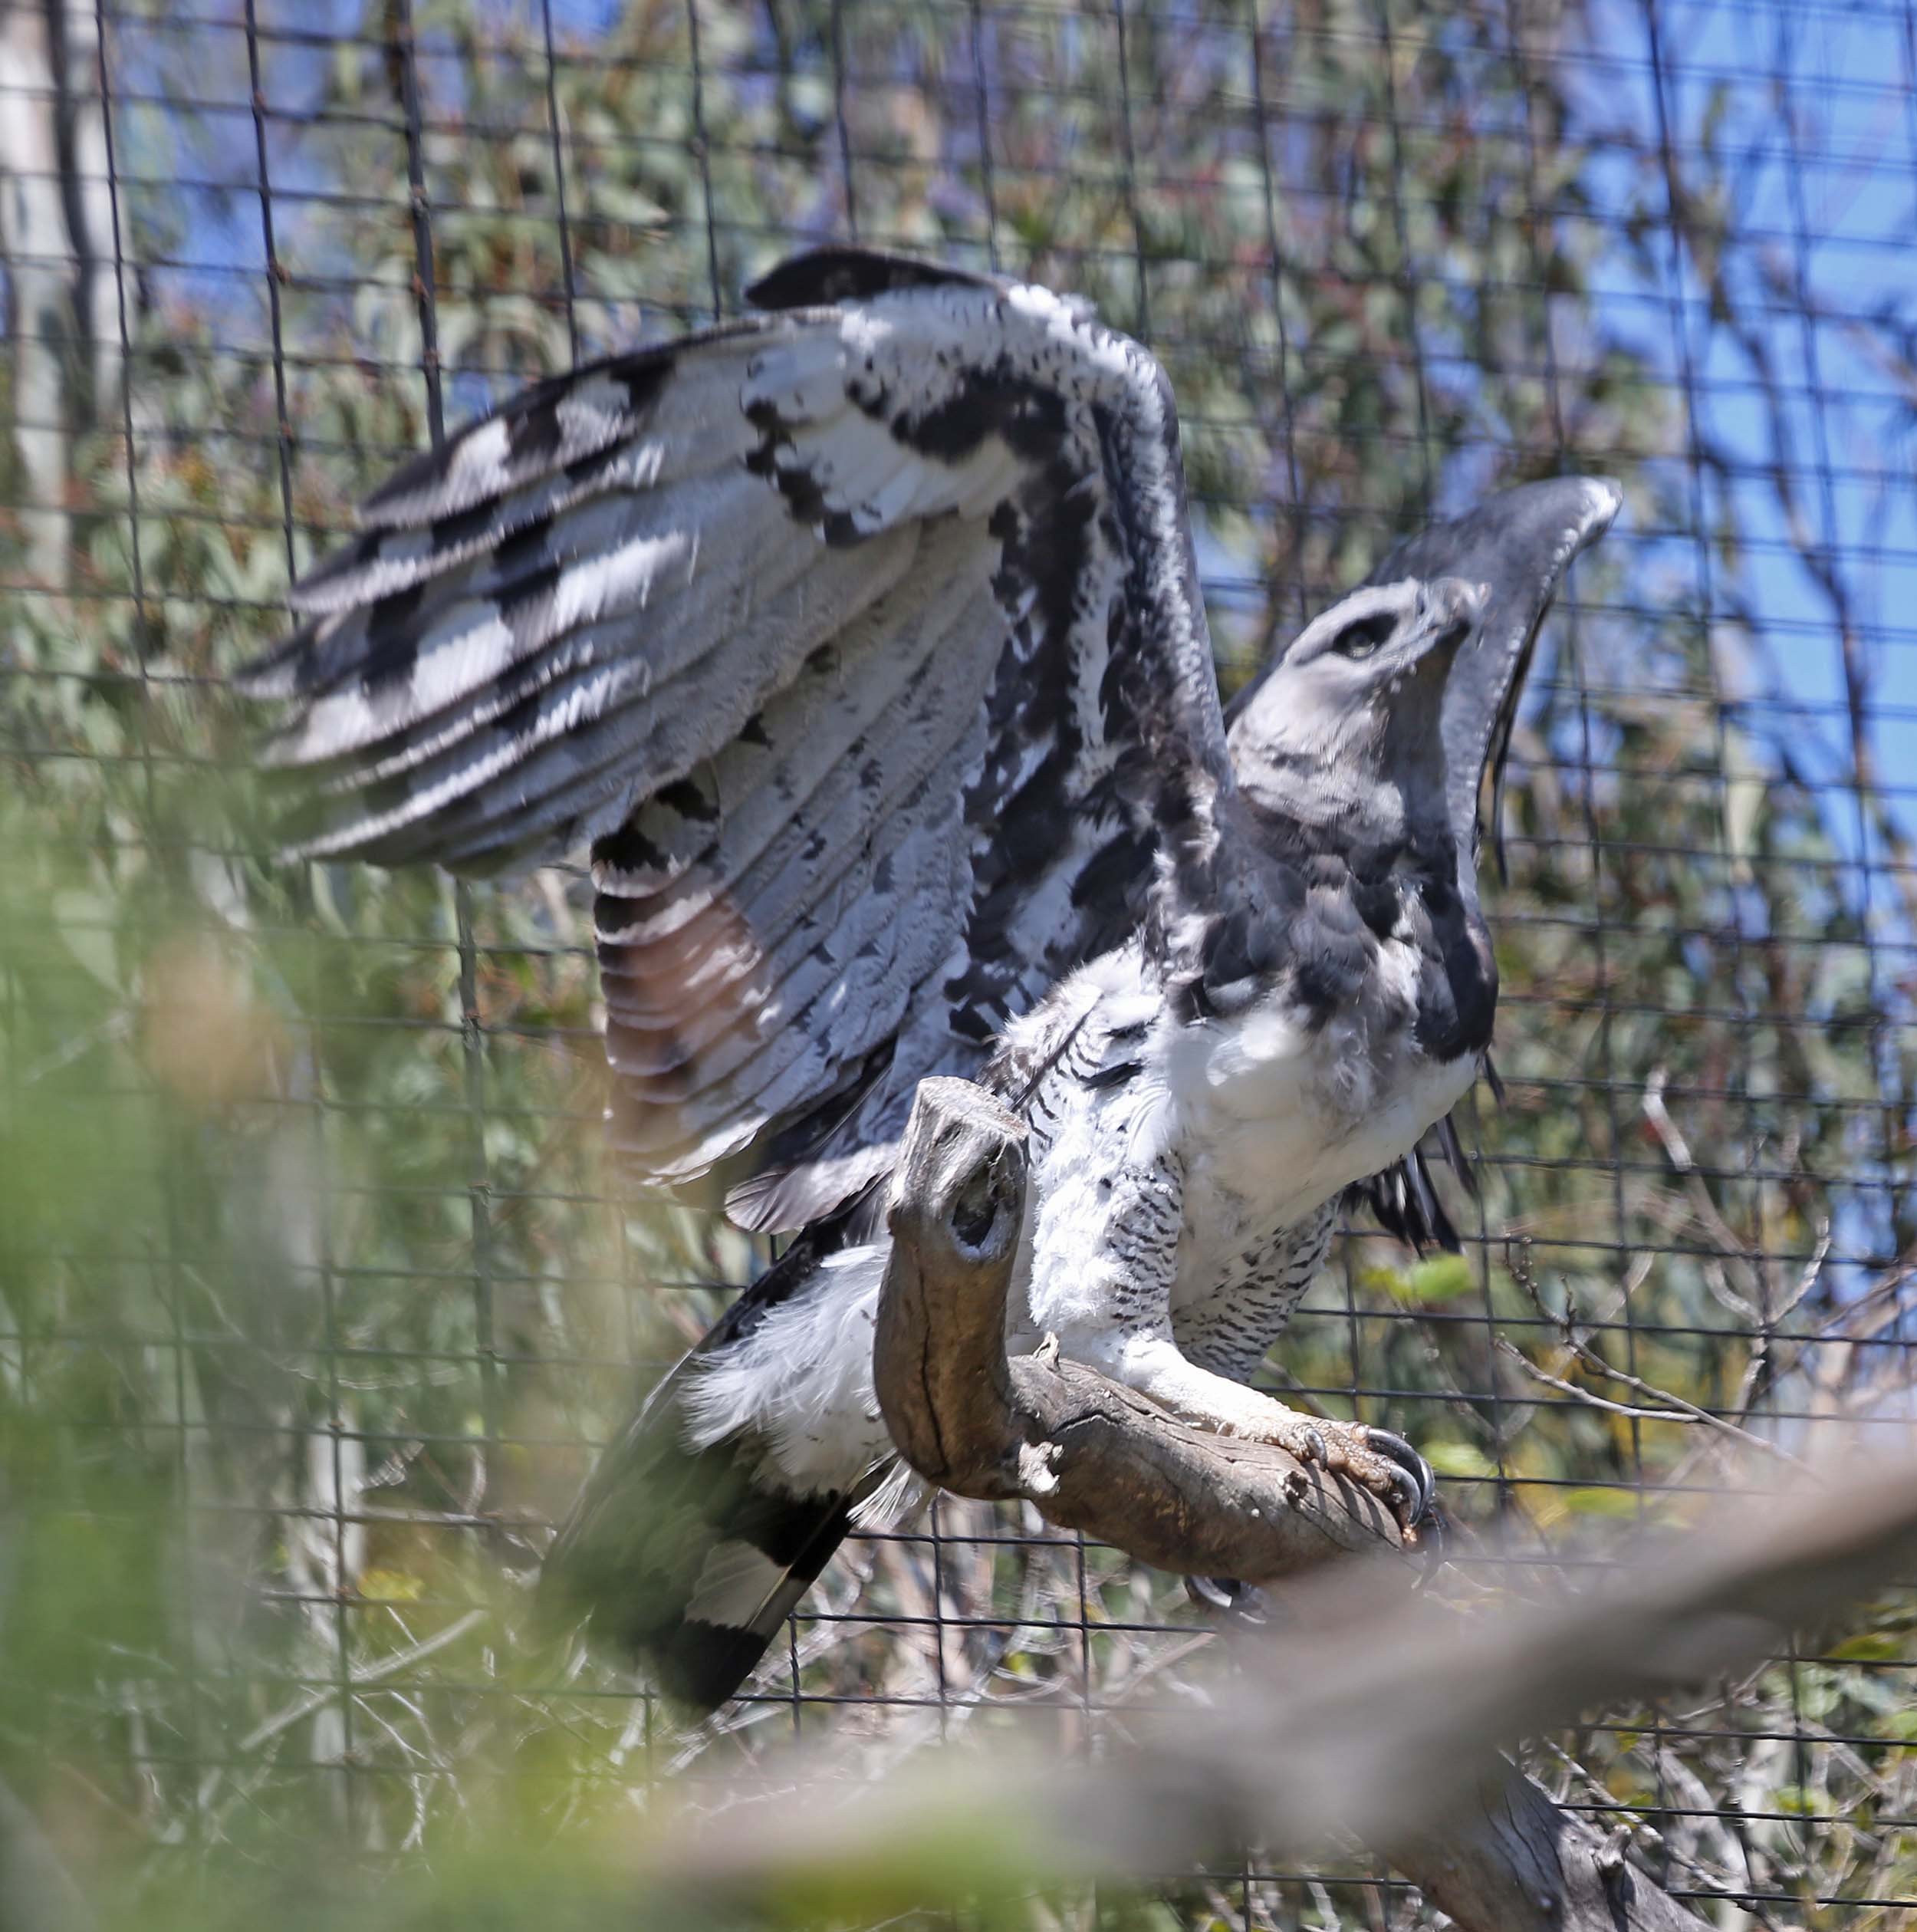 Pictures and information on Harpy Eagle